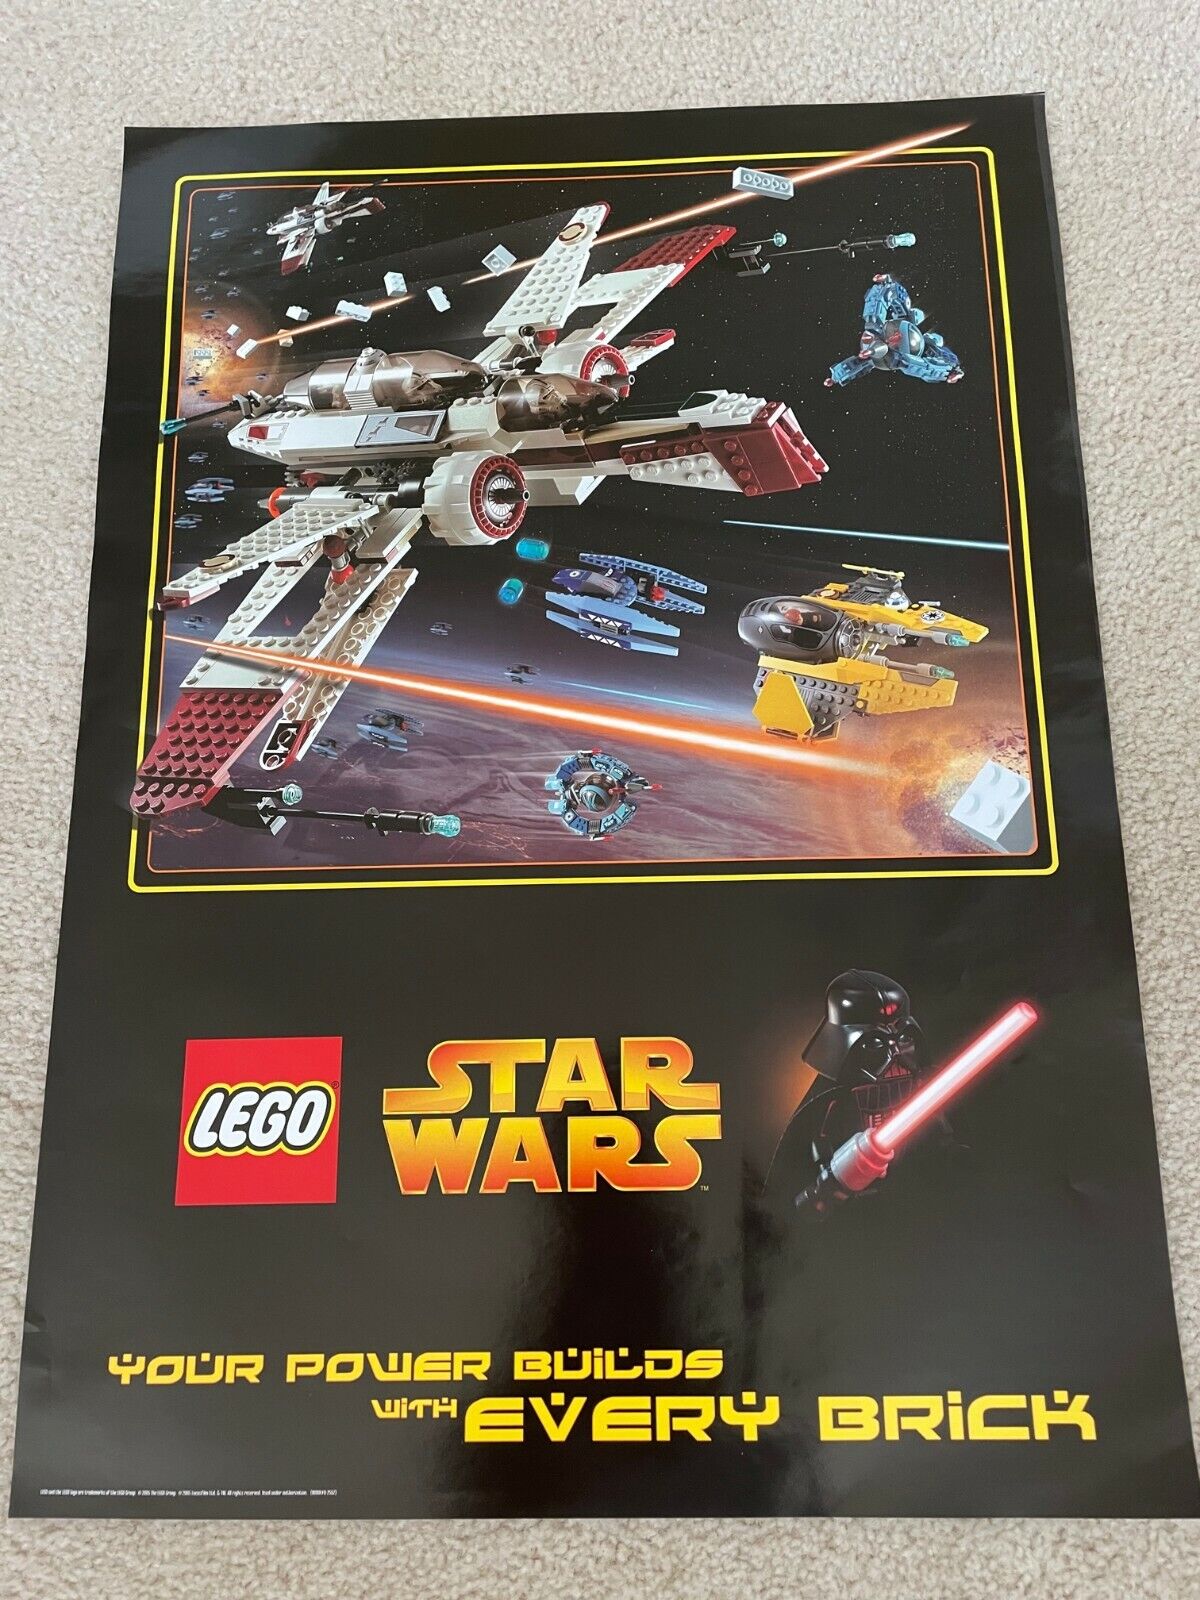 2005 SDCC Star Wars Lego "Your Power Builds with Every Brick